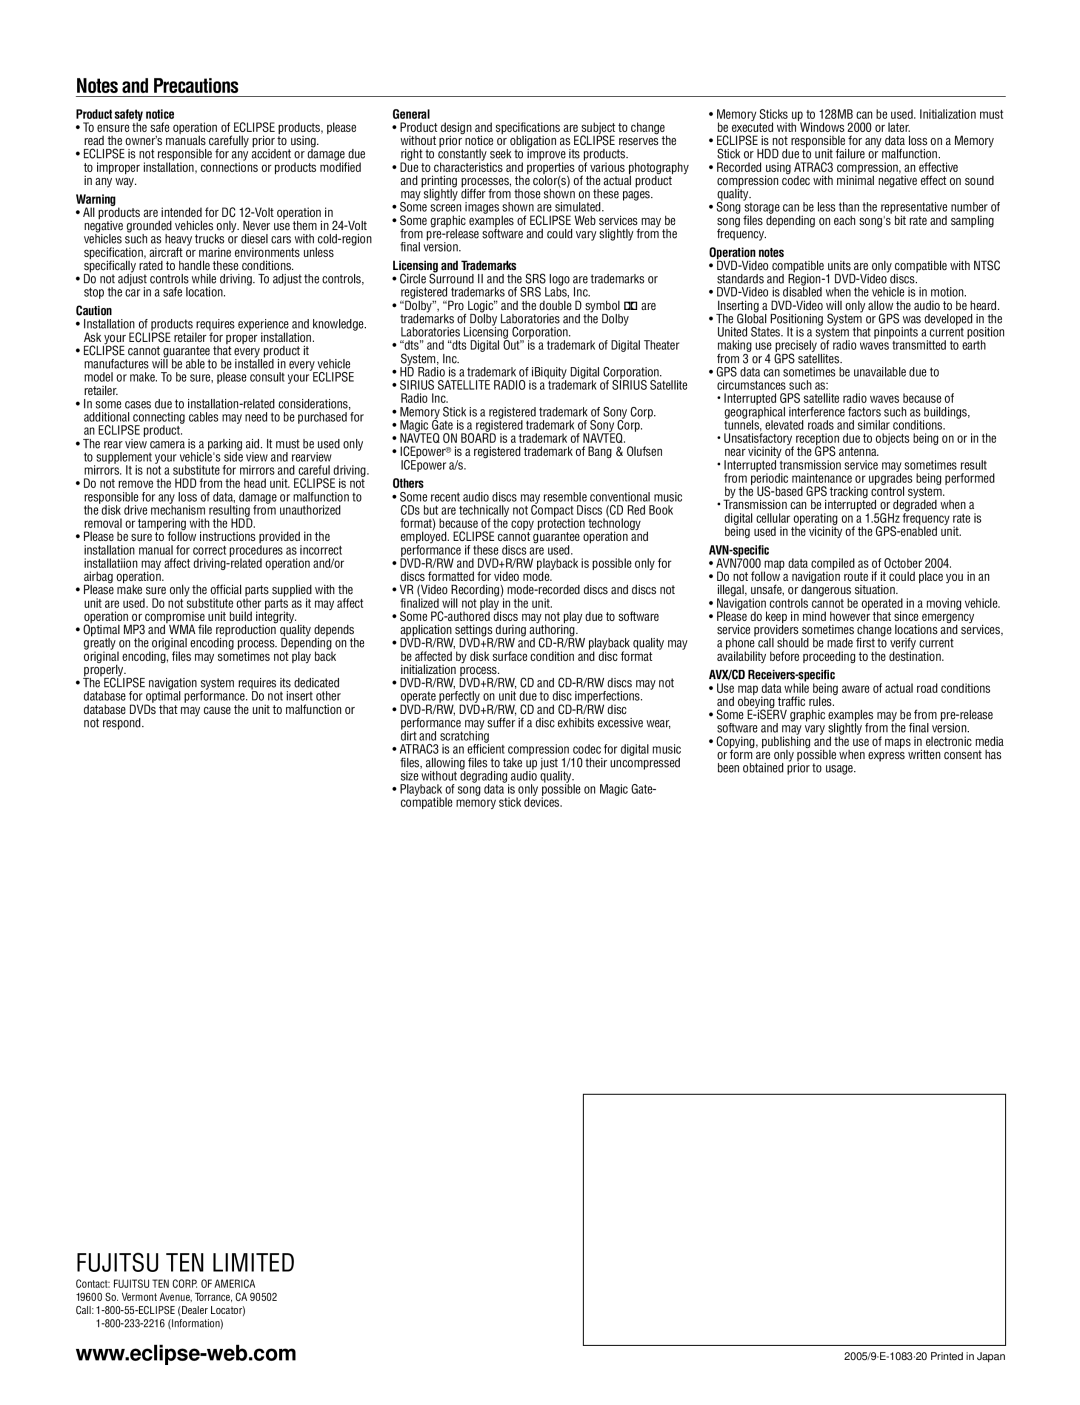 Eclipse - Fujitsu Ten AVN5435 manual Fujitsu Ten Limited, Product safety notice, General, Licensing and Trademarks, Others 